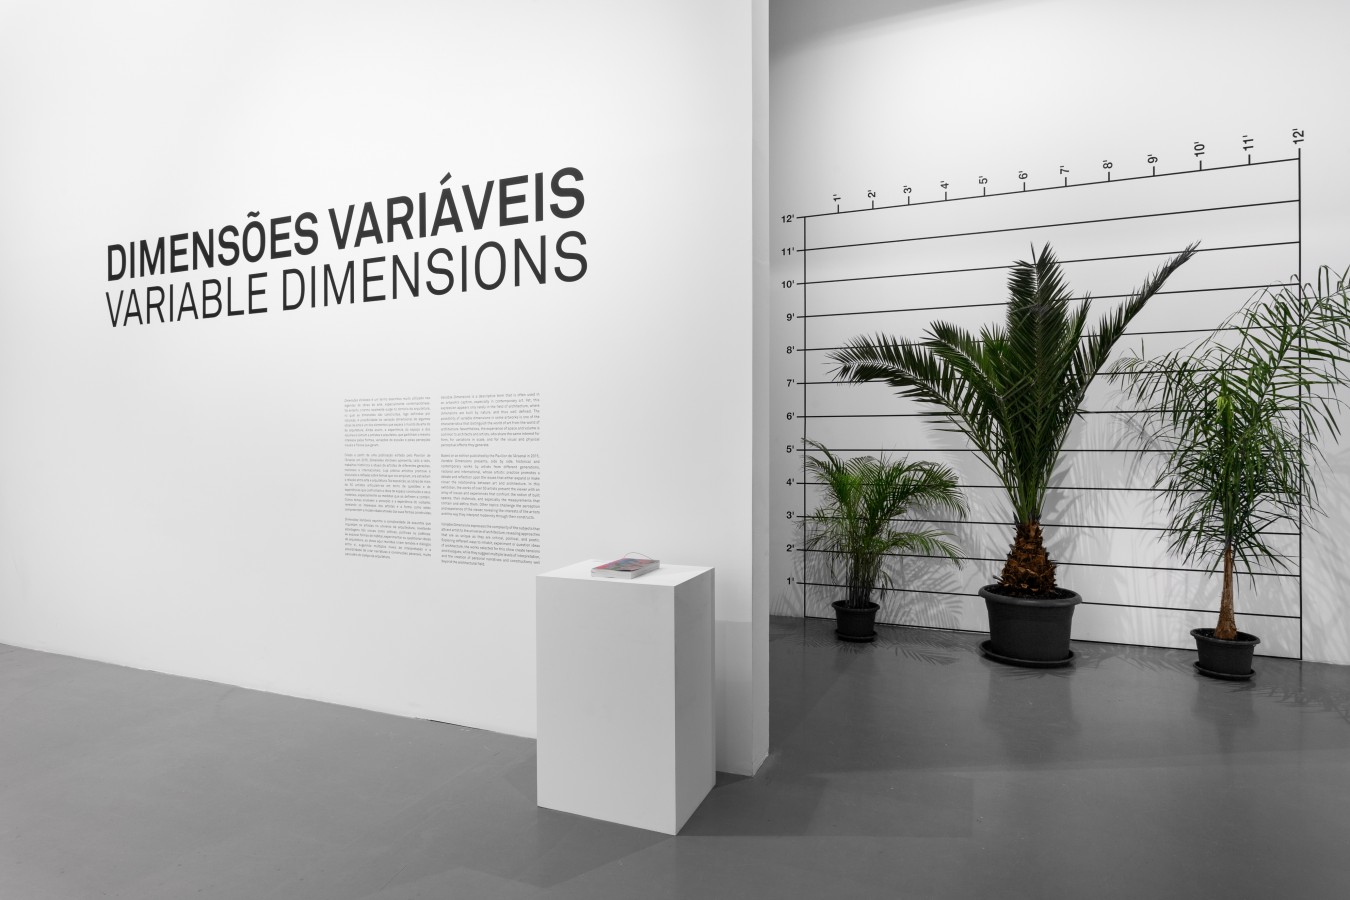 'Variable Dimensions, Artists and Architecture' - Exhibition view, MAAT, Lisbon, 2017